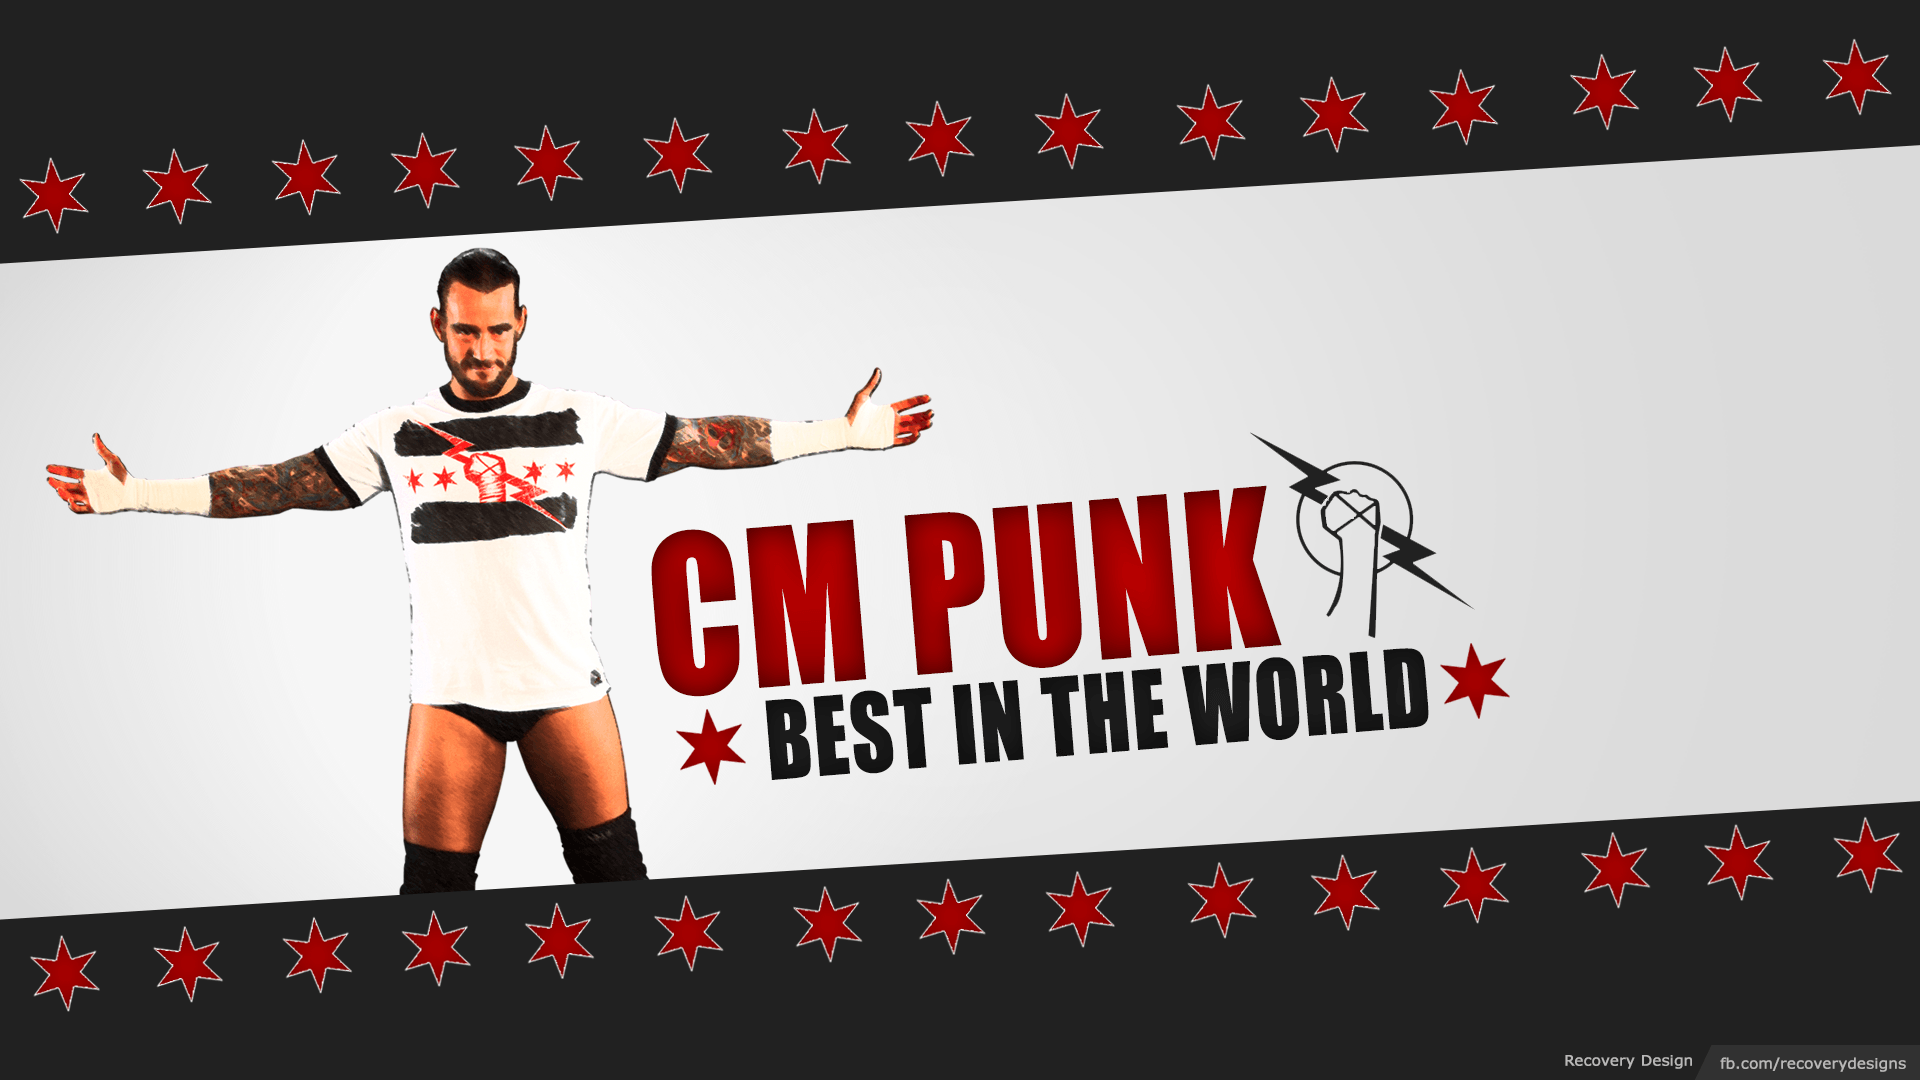 More Like CM Punk BEST IN THE WORLD